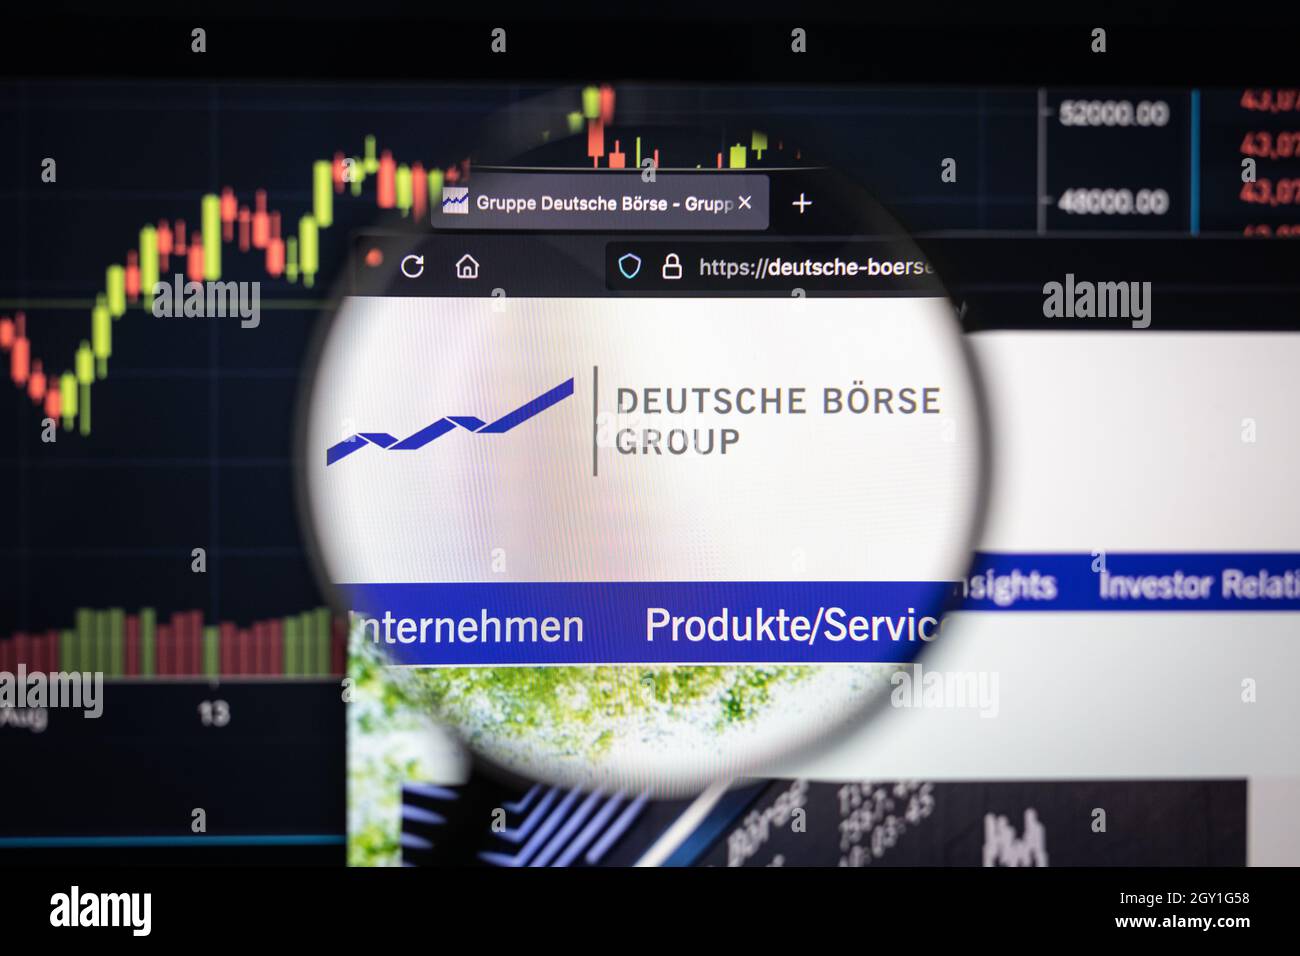 Deutsche Boerse Group company logo on a website with blurry stock market developments in the background, seen on a computer screen Stock Photo